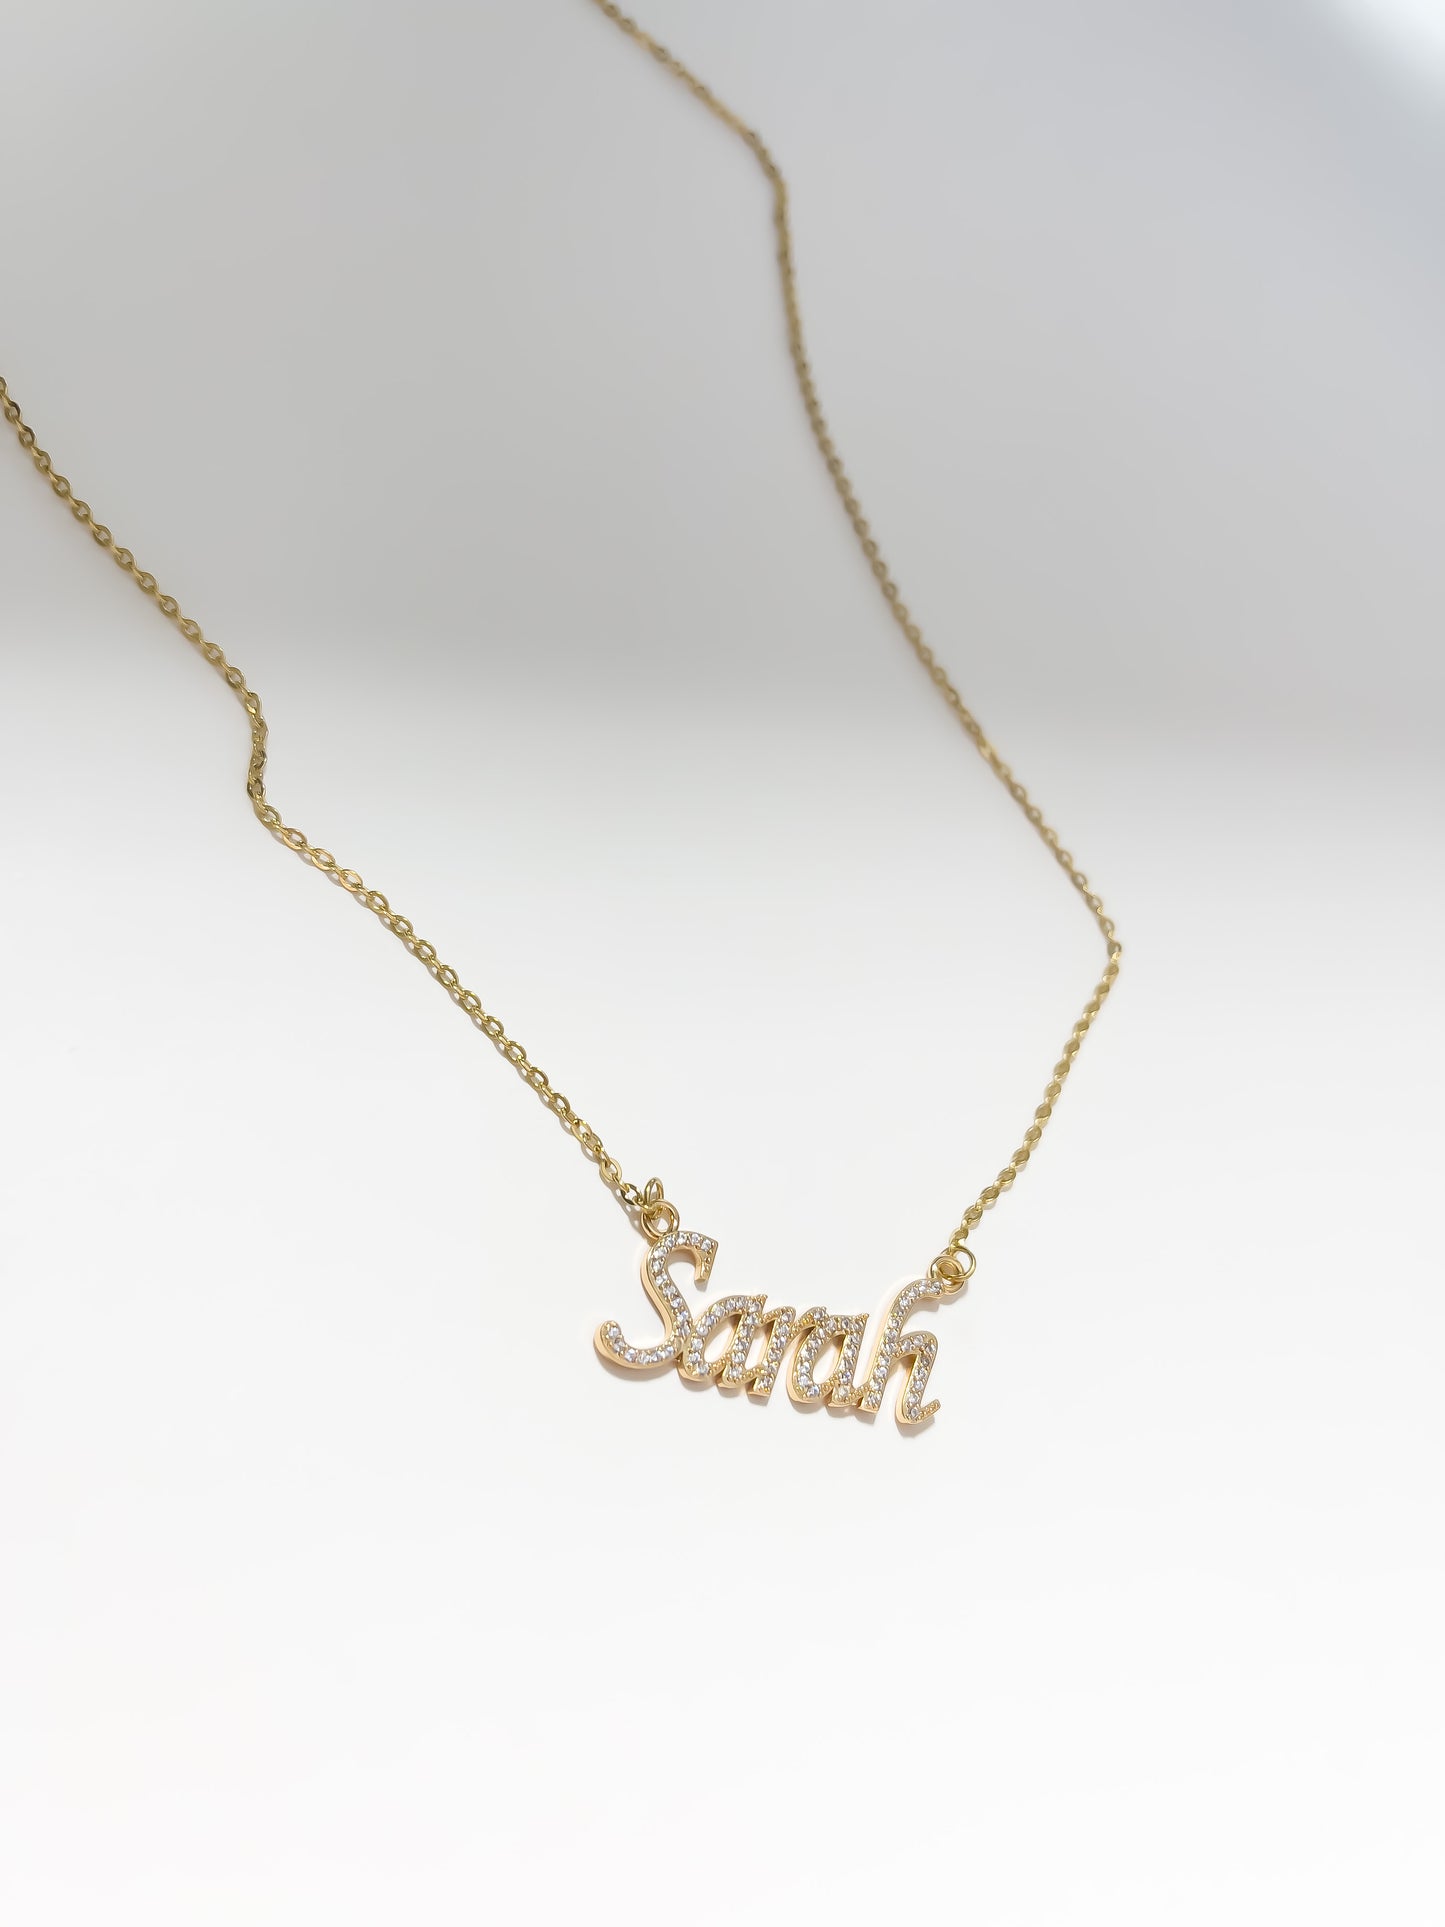 The Zircon Personalised Name Necklace